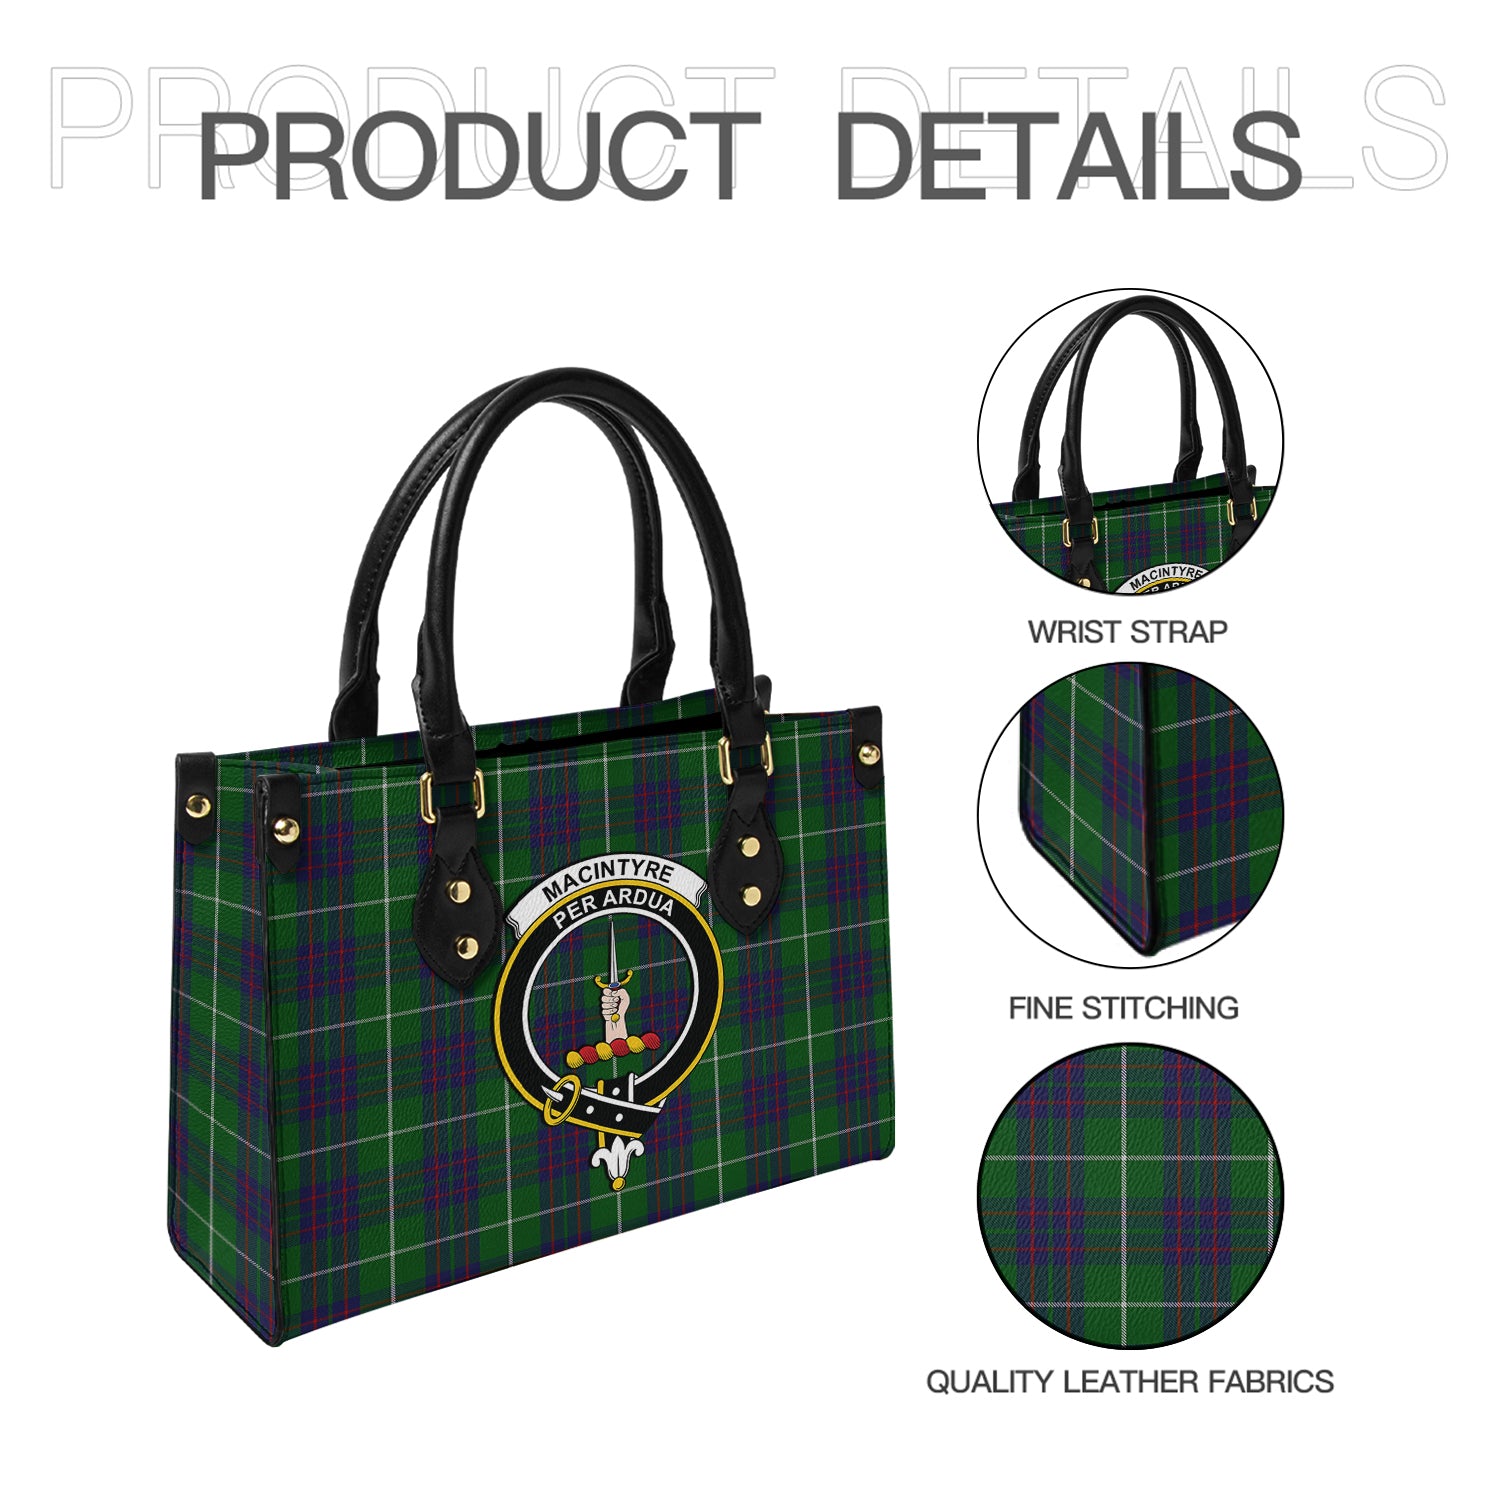 macintyre-hunting-tartan-leather-bag-with-family-crest